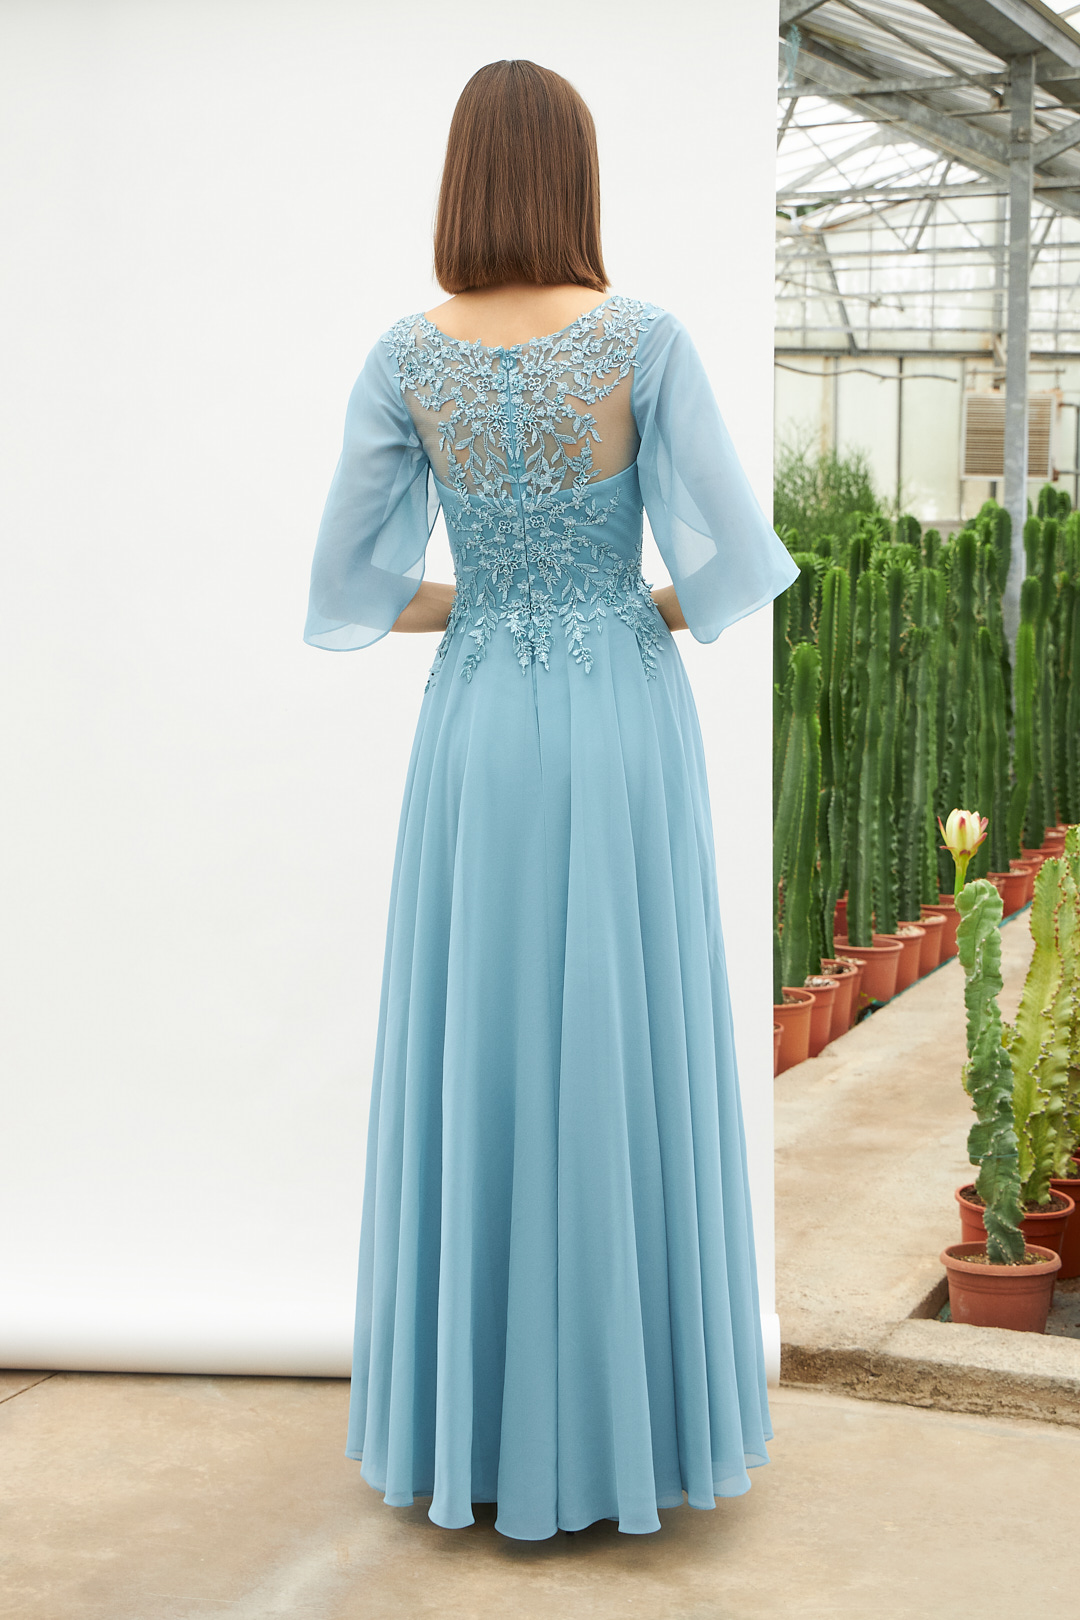 Classic Dresses / Long classic chiffon dress with fully beaded top and sleeves with chiffon